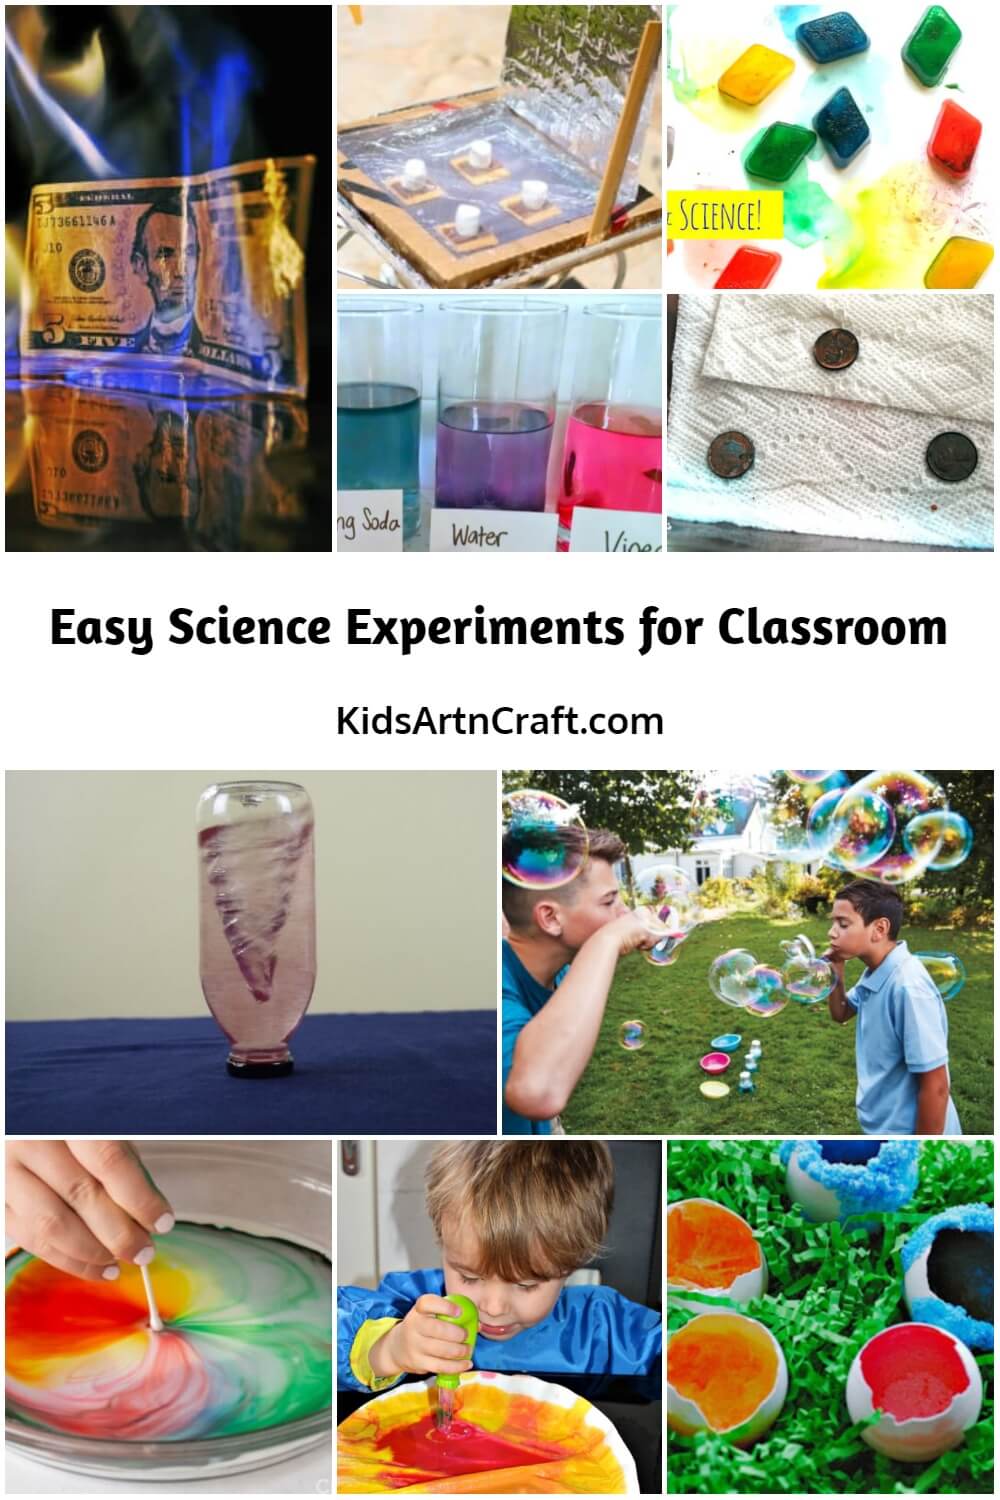 Easy Science Experiments for Classroom